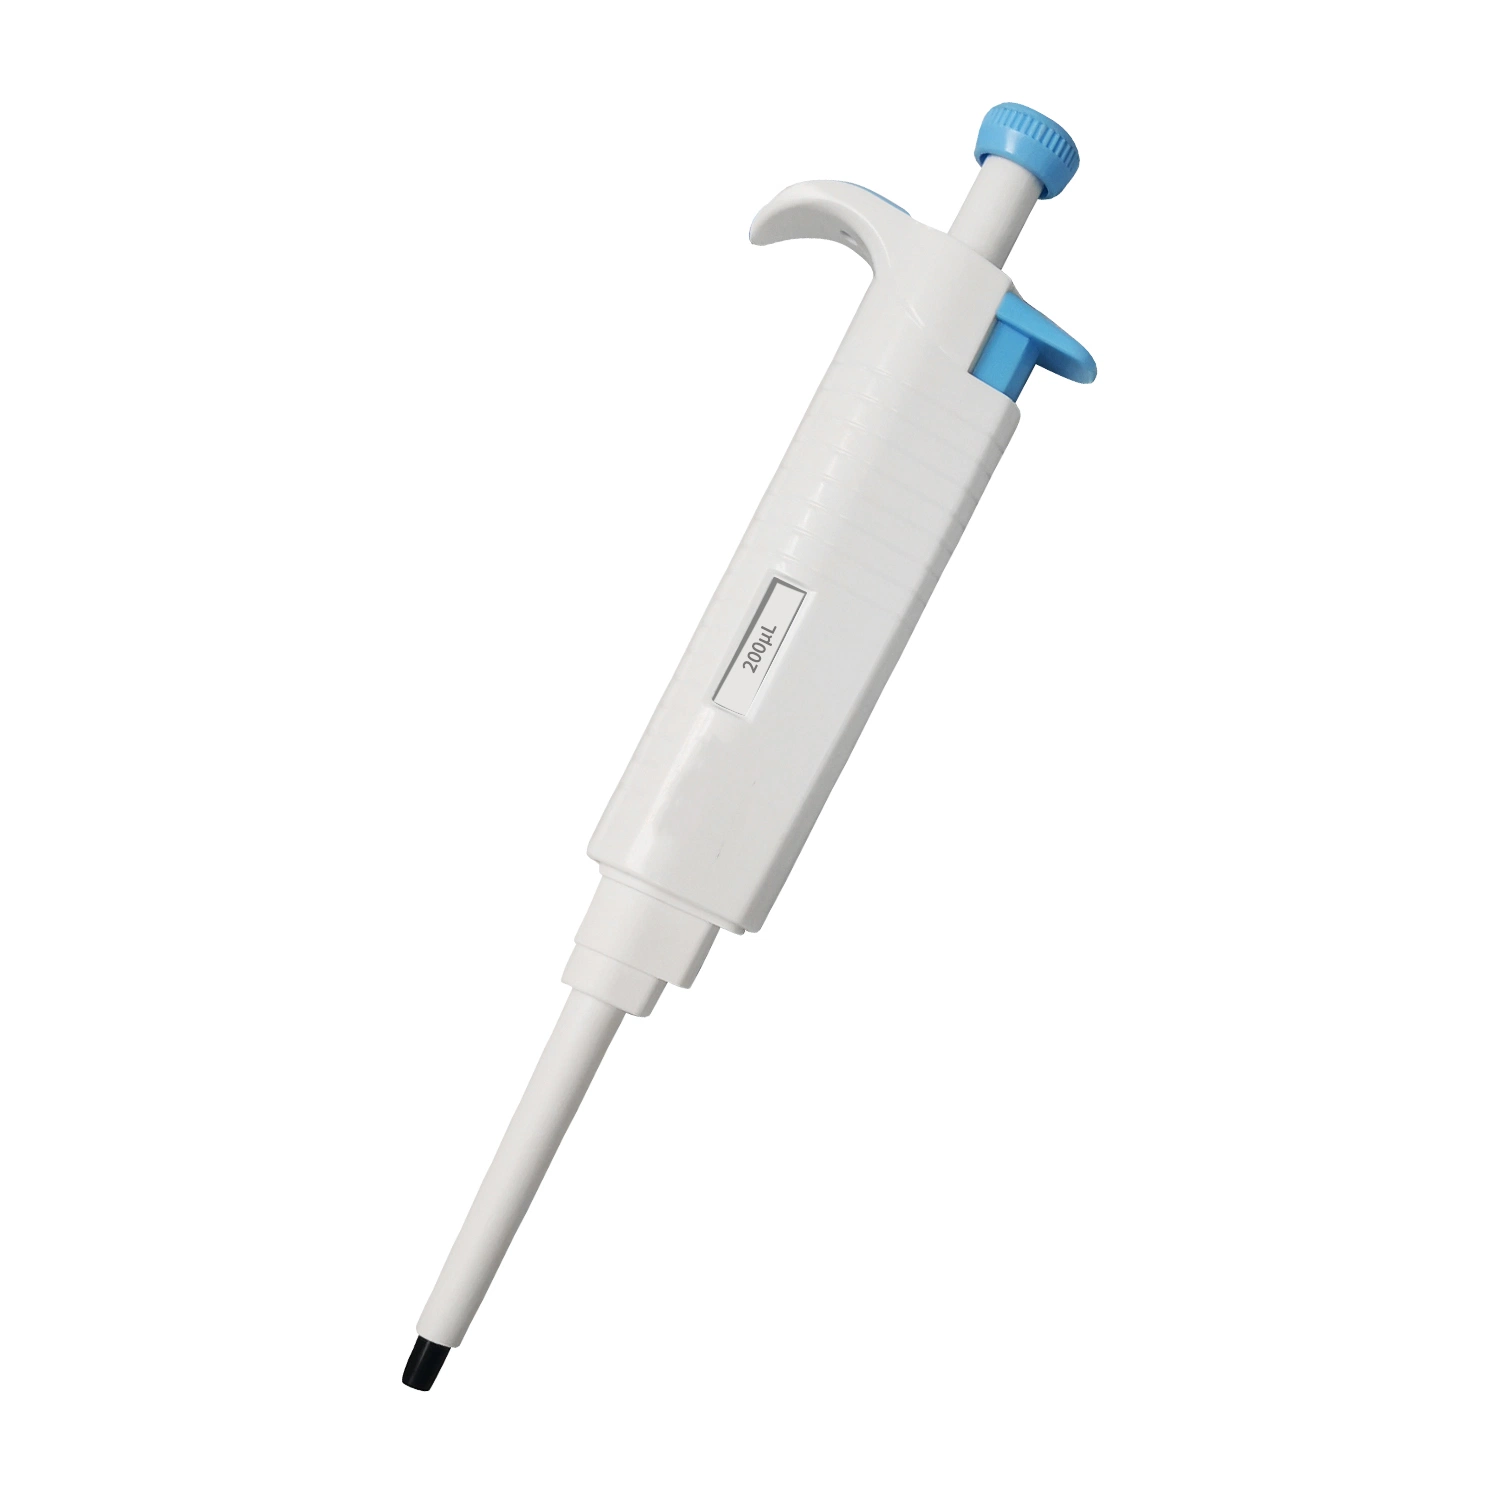 Mpp Series Fully Autoclavable Single-Channel Fixed 0.1UL-5000UL Pipette